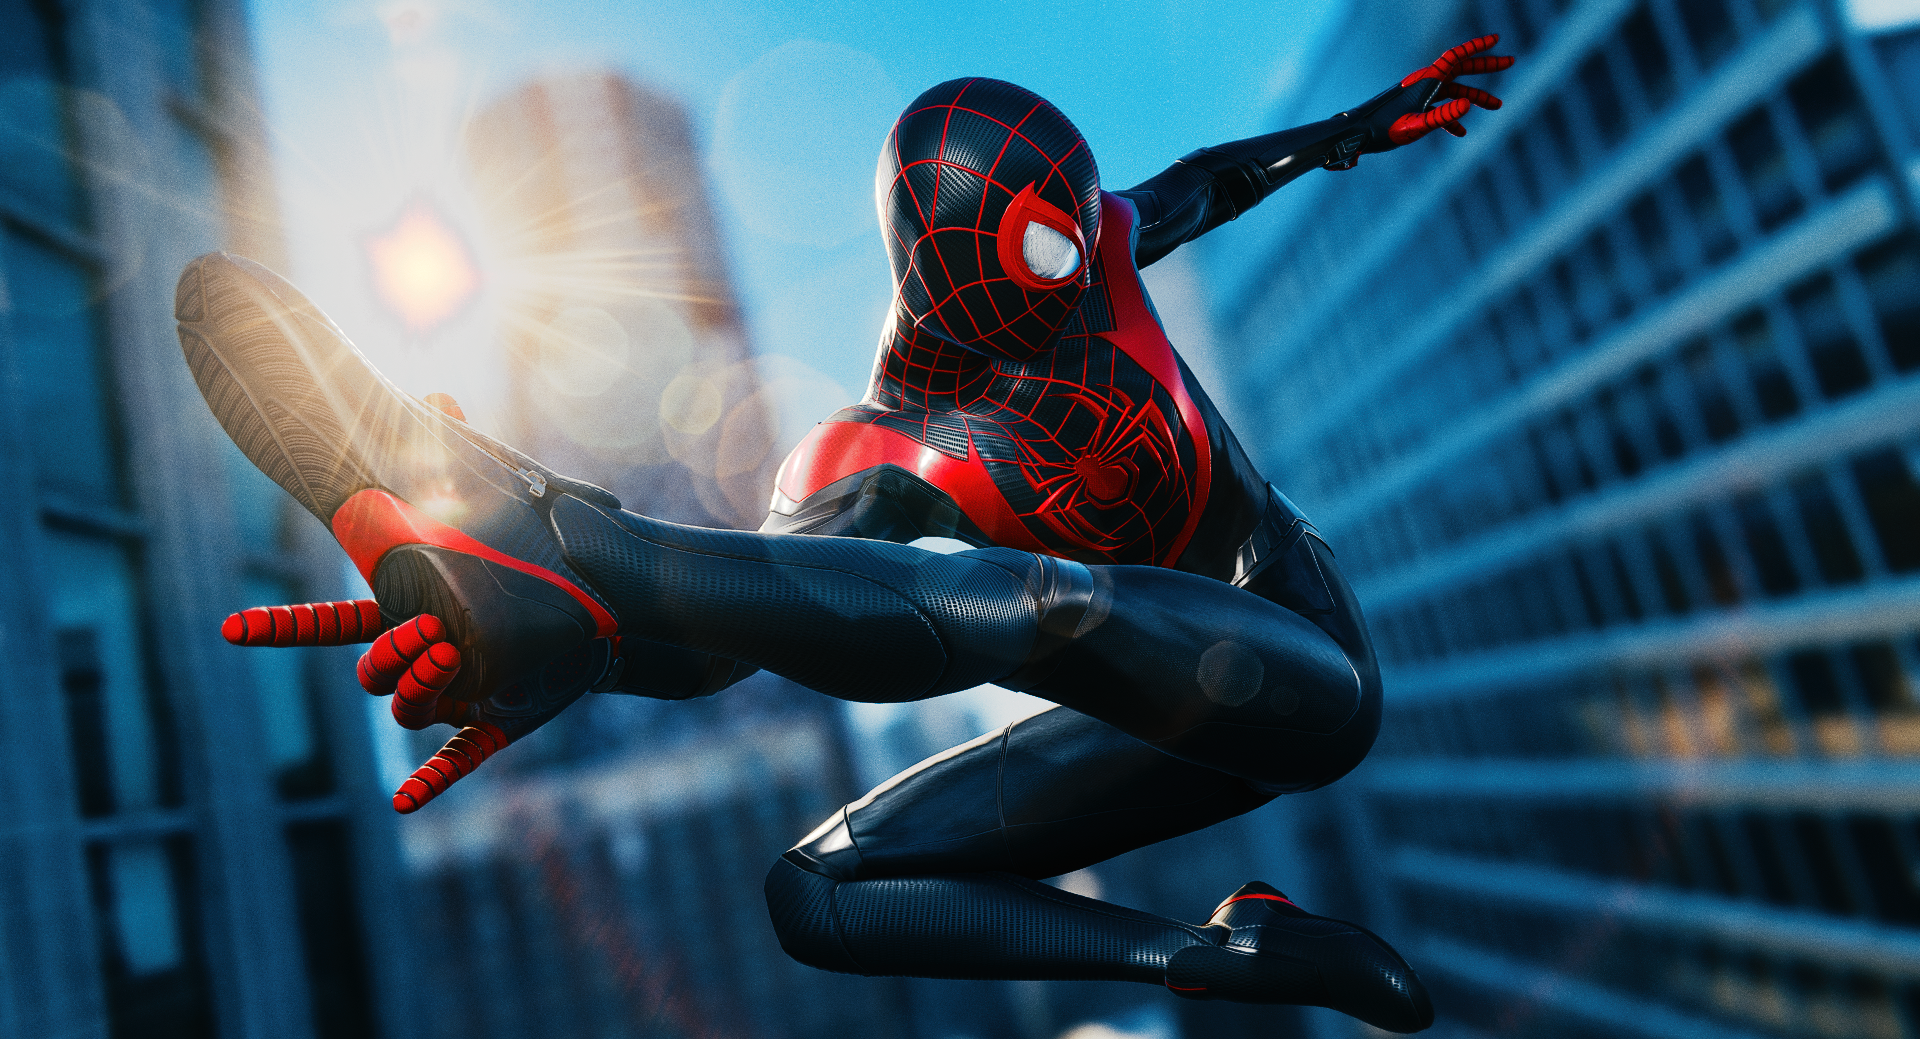 MARVEL'S SPIDER-MAN - MILES MORALES [Review]: We Fly High.